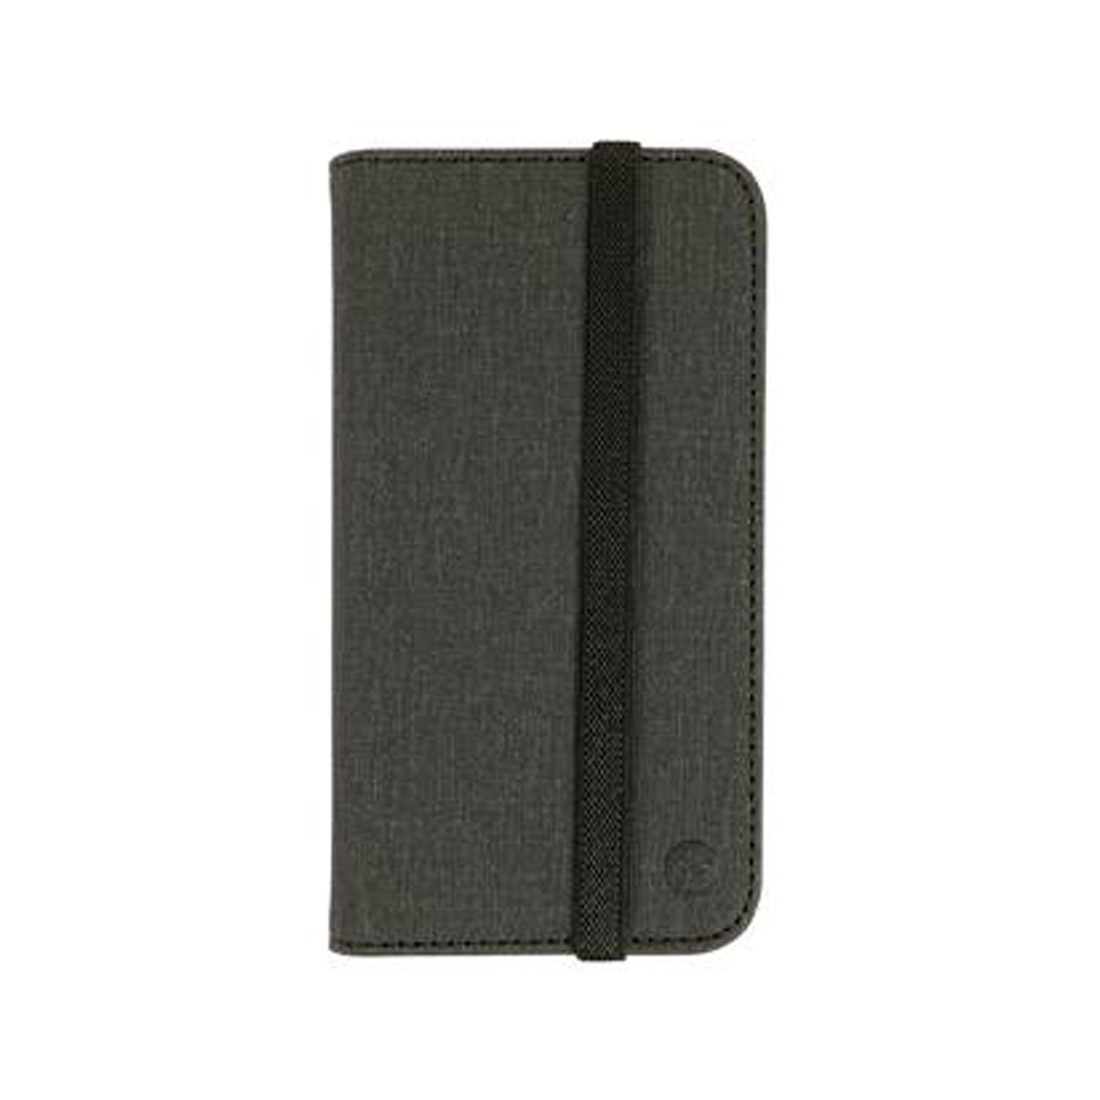 Sprout Sling Case for iPhone 11 - Black